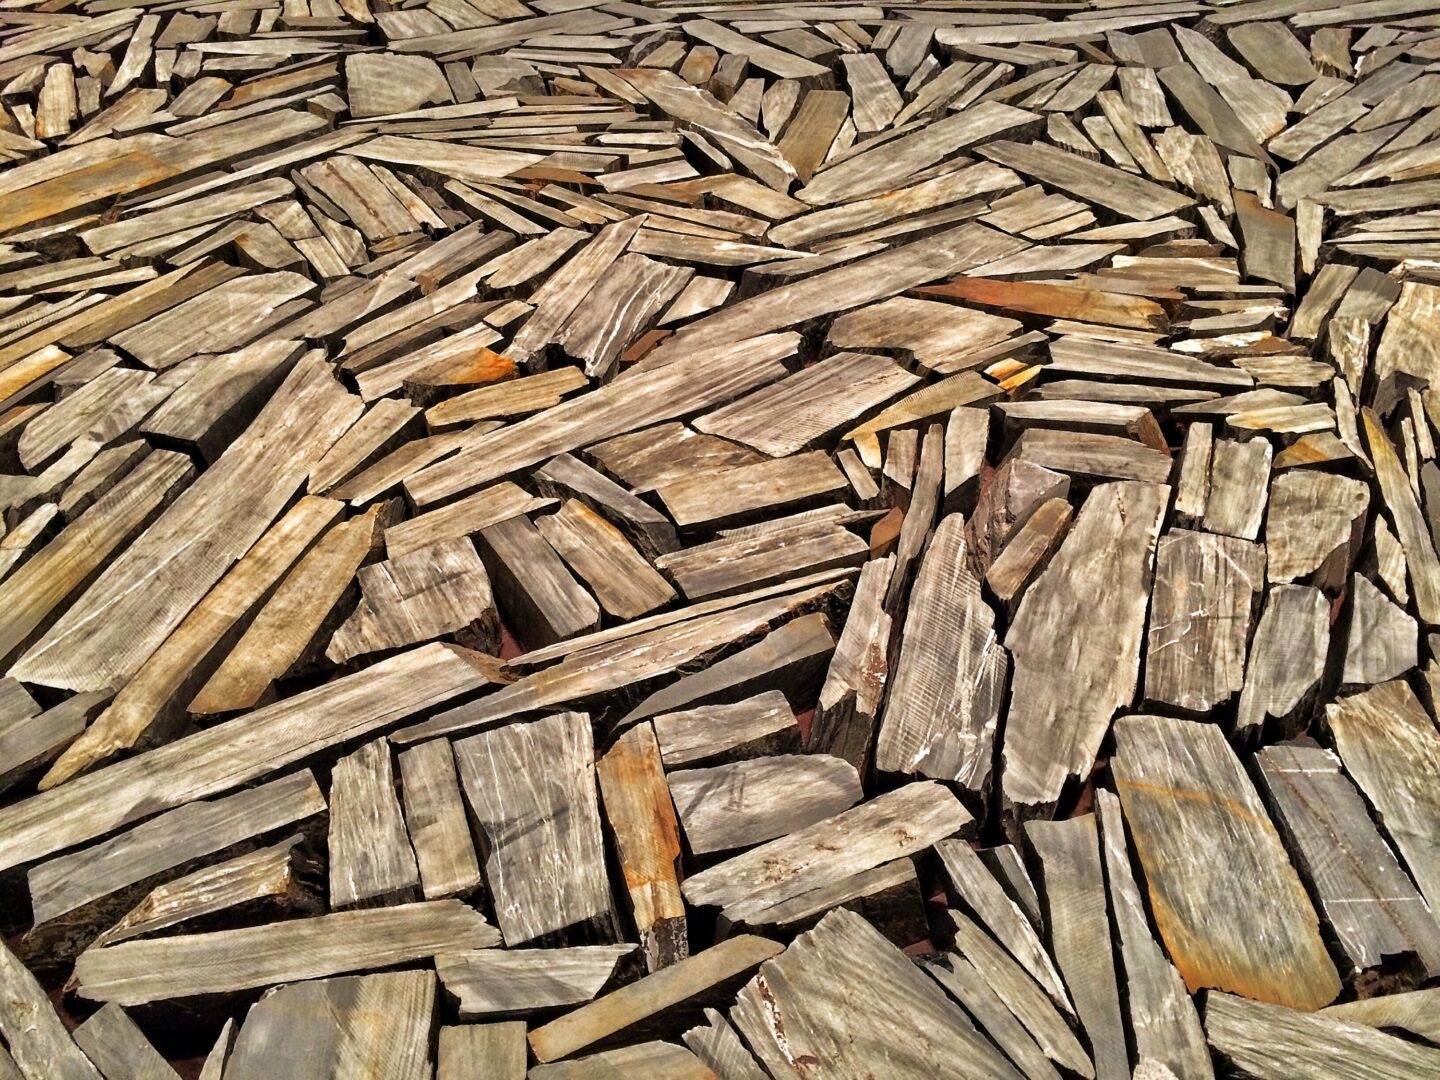 A pile of wooden planks on the ground.